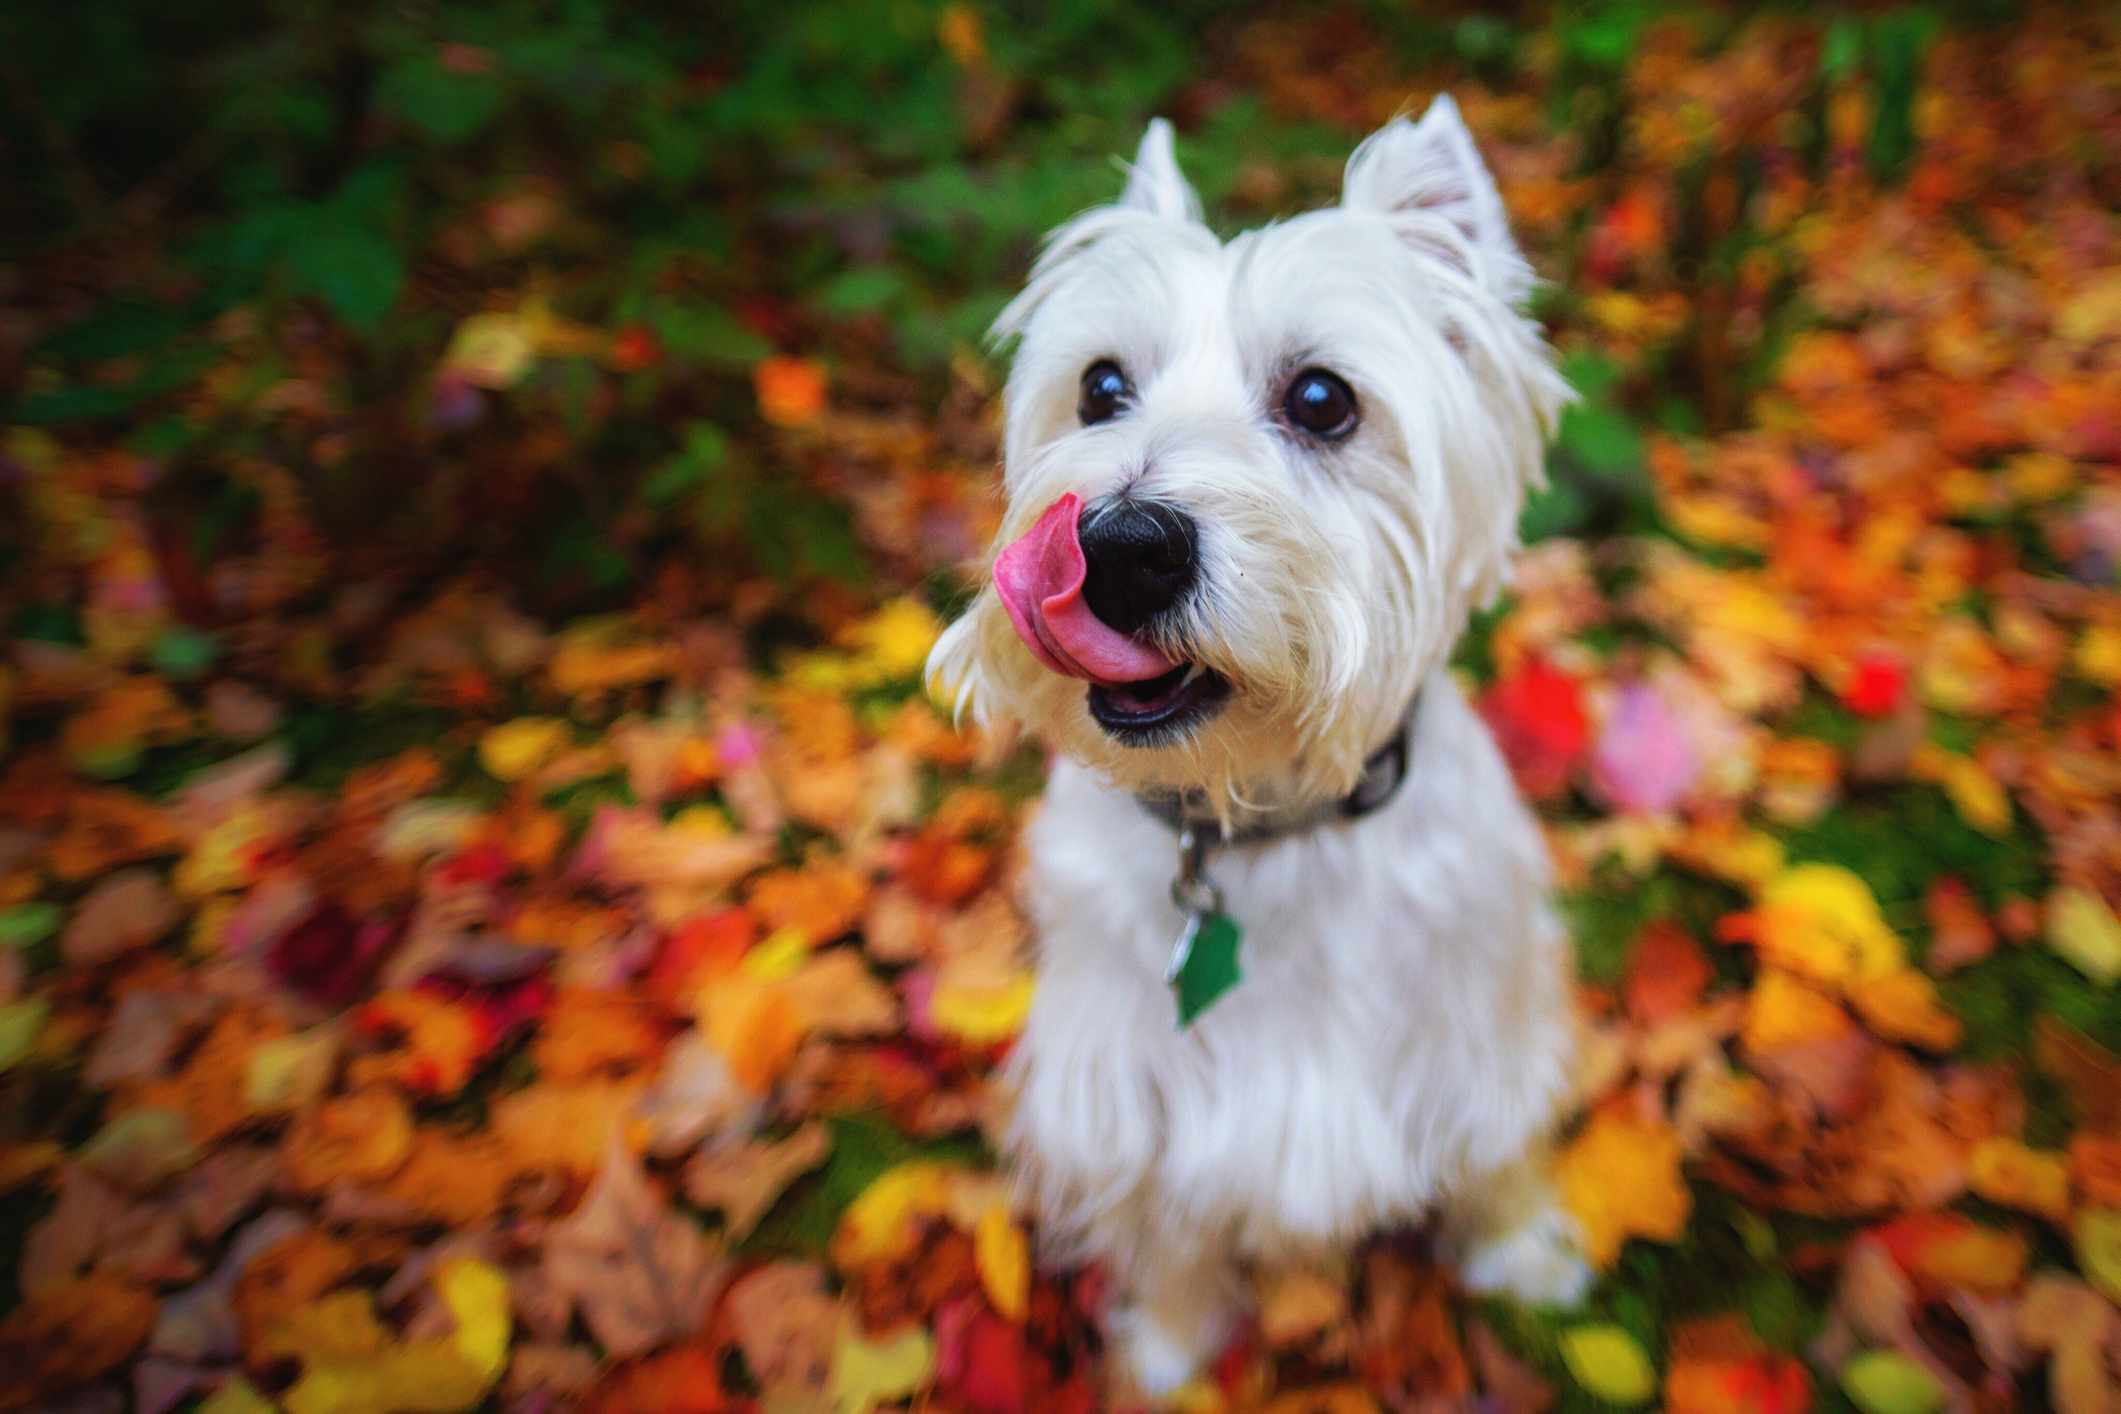 West Highland White Terrier with tongue licking nose sitting on a bed of leaves.